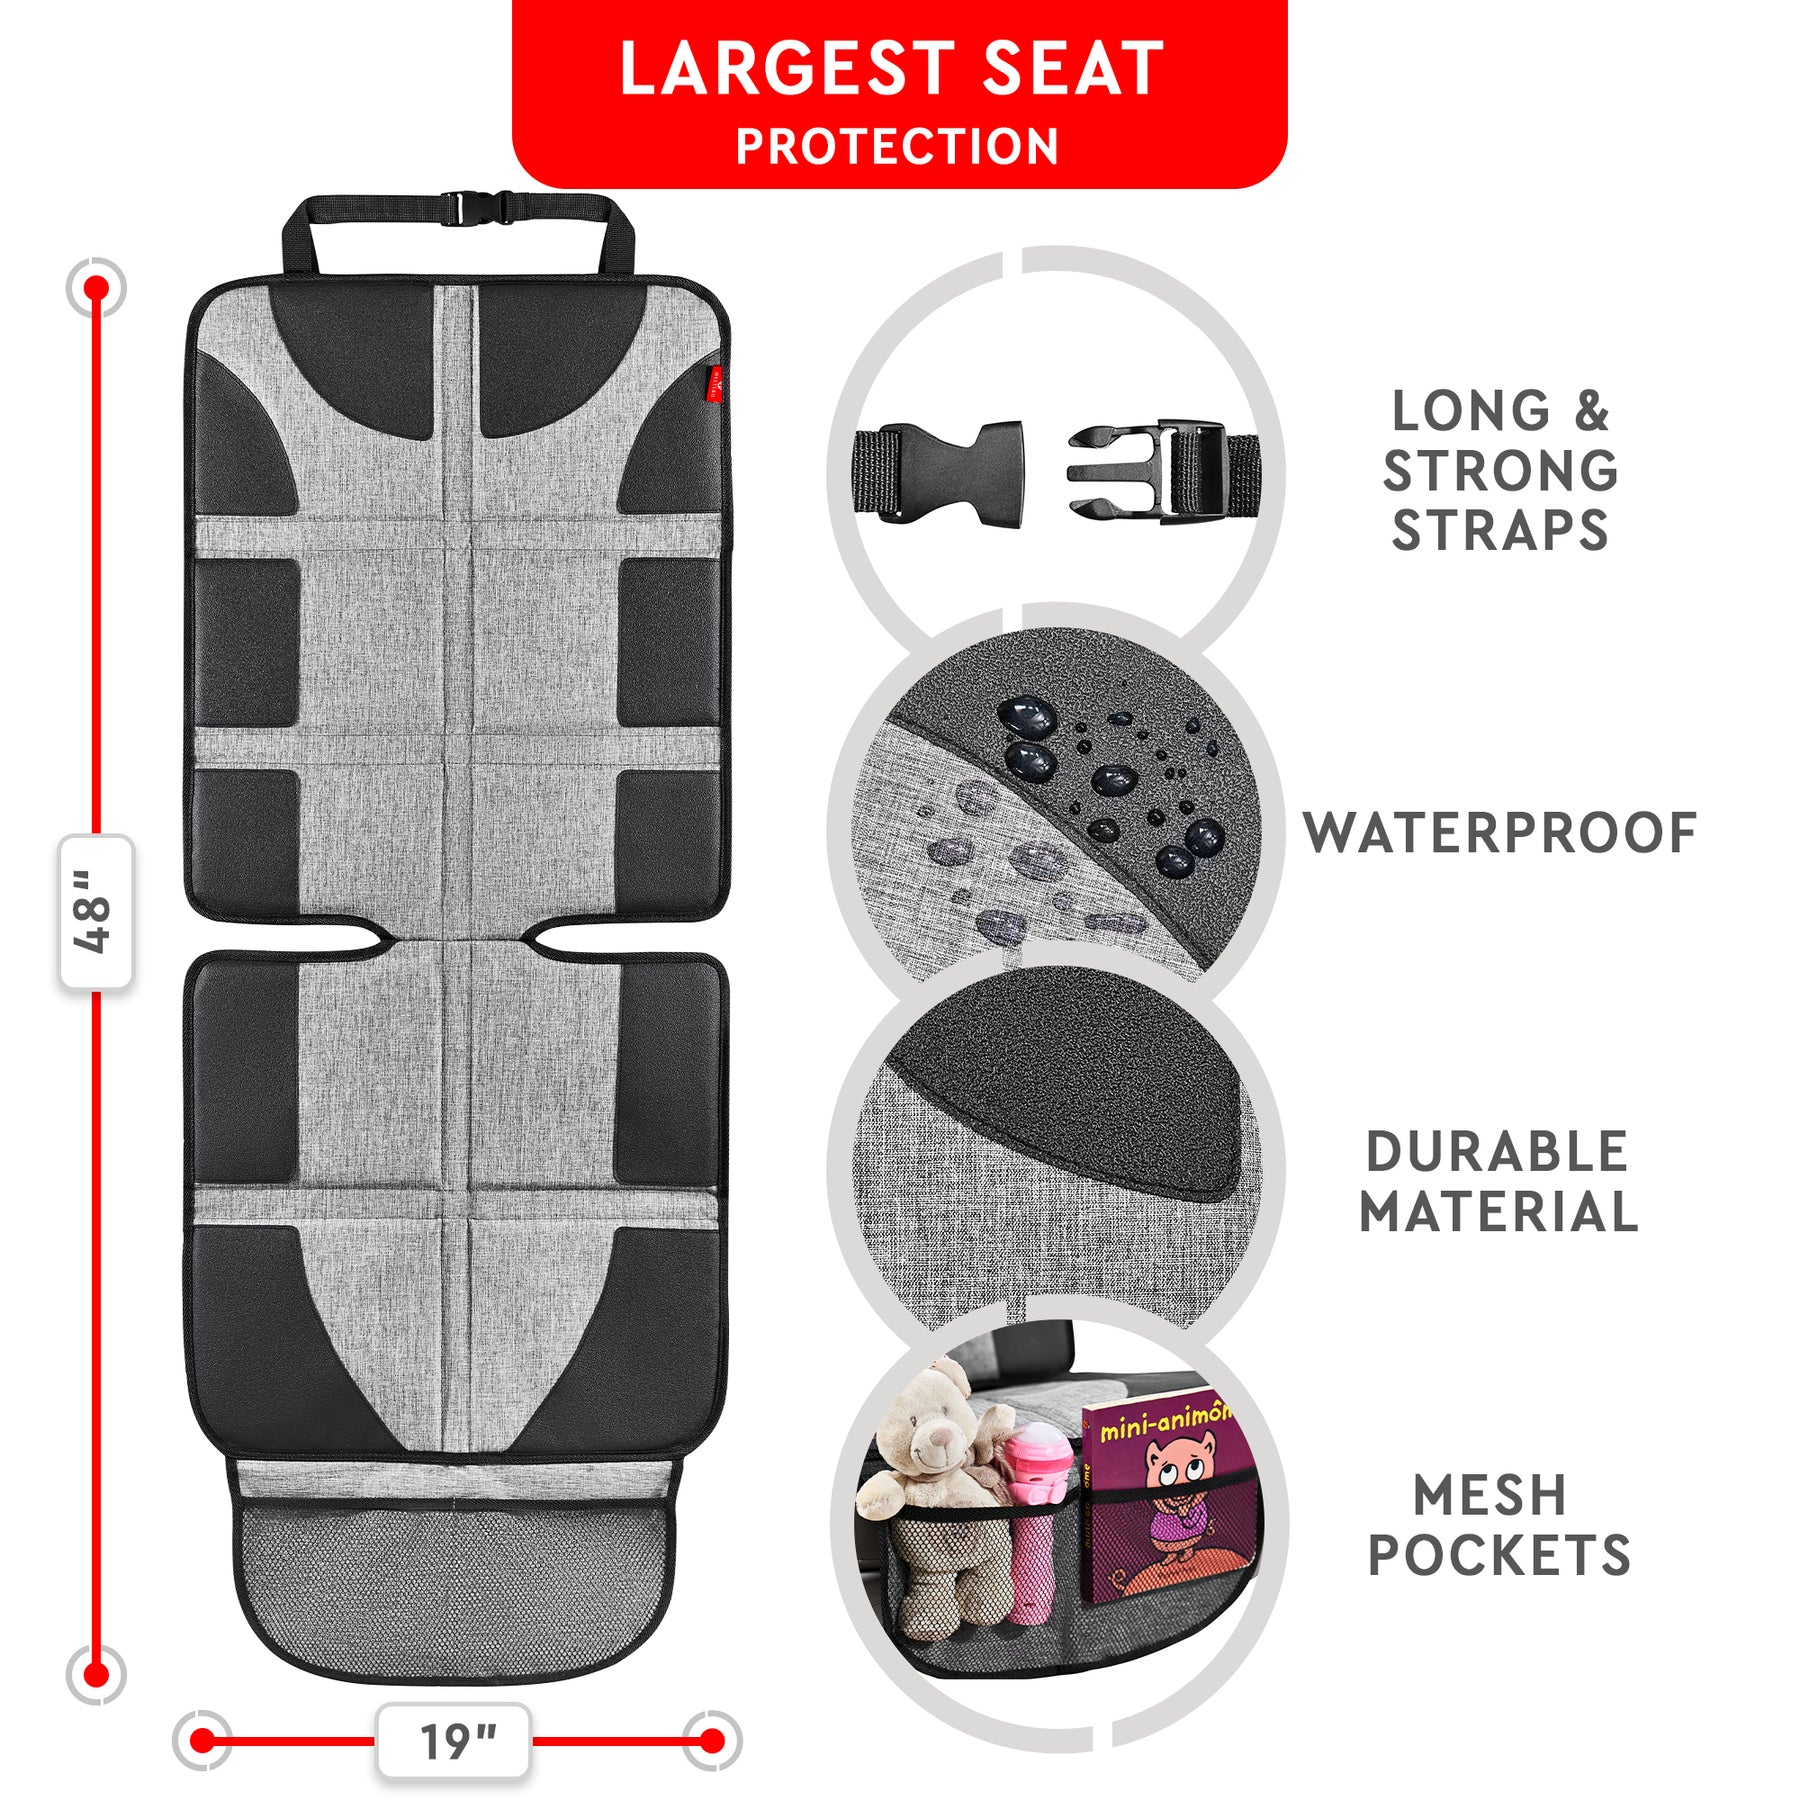 Helteko Car Seat Protector with Thickest Padding - Large Cover for Baby Carseat Safety - Waterproof & Stain Resistant Protective 300D Fabric - Child